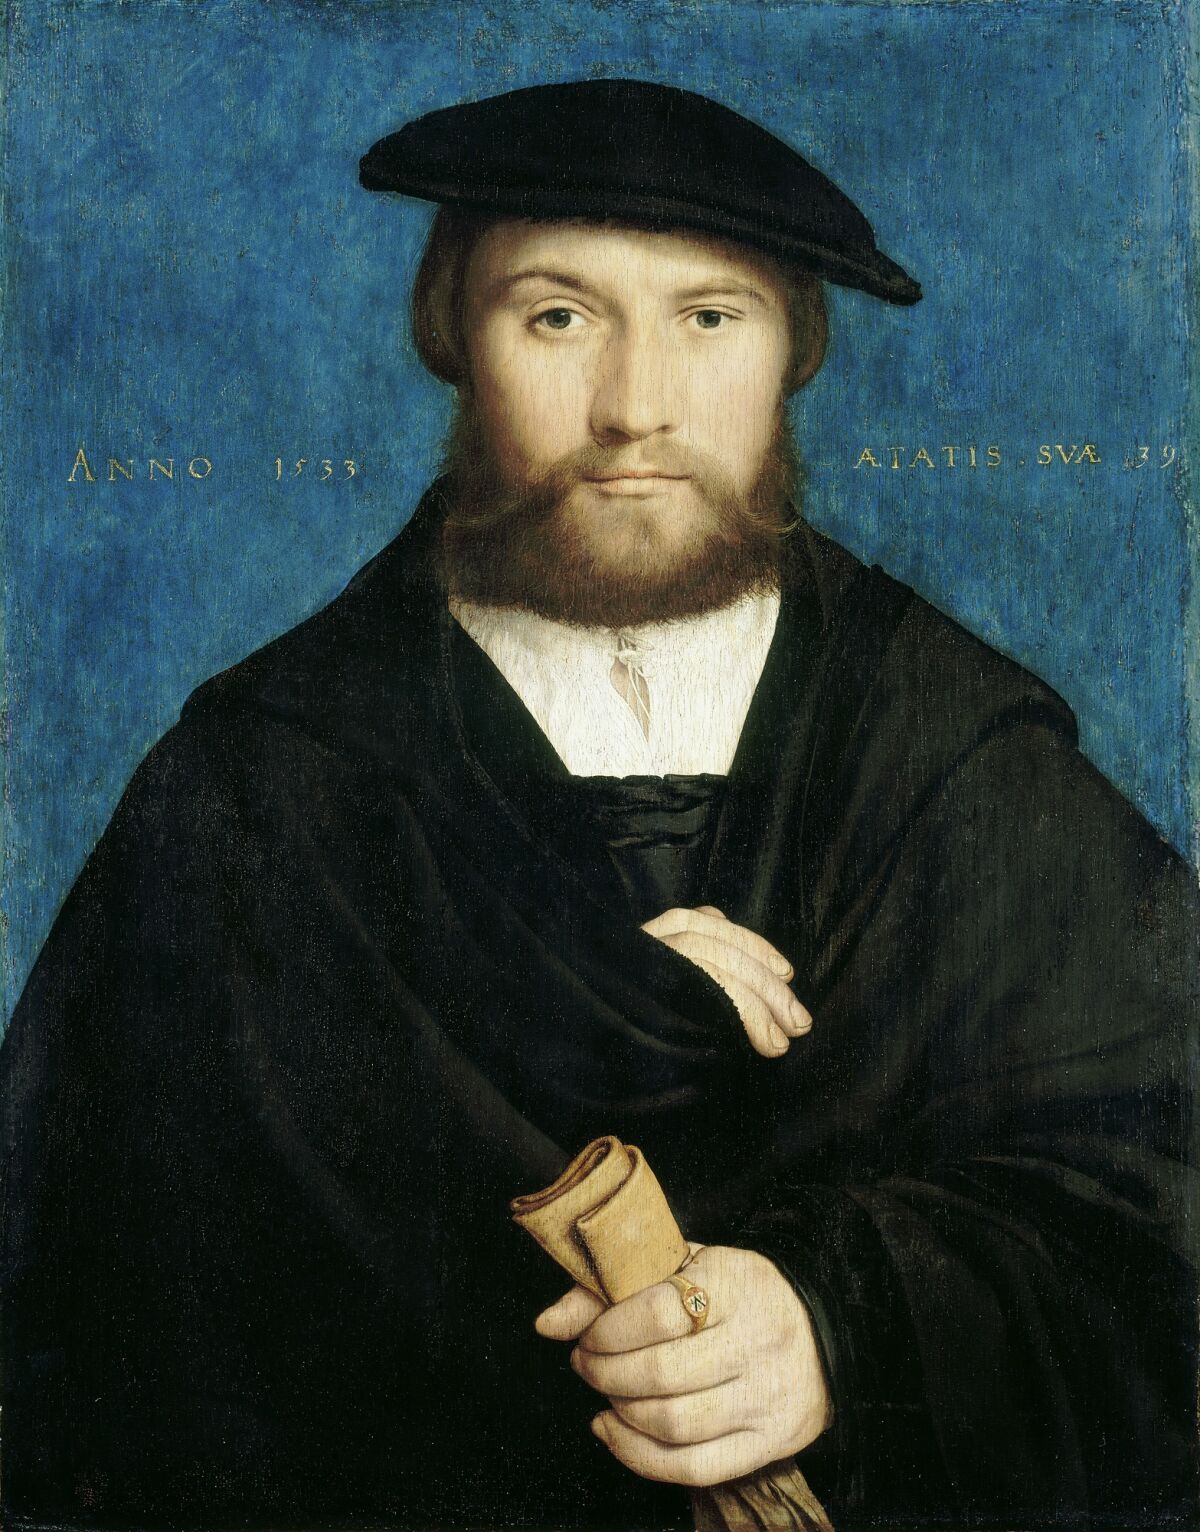 A painting of a bearded man in a hat and cloak, clutching rolled up paper.